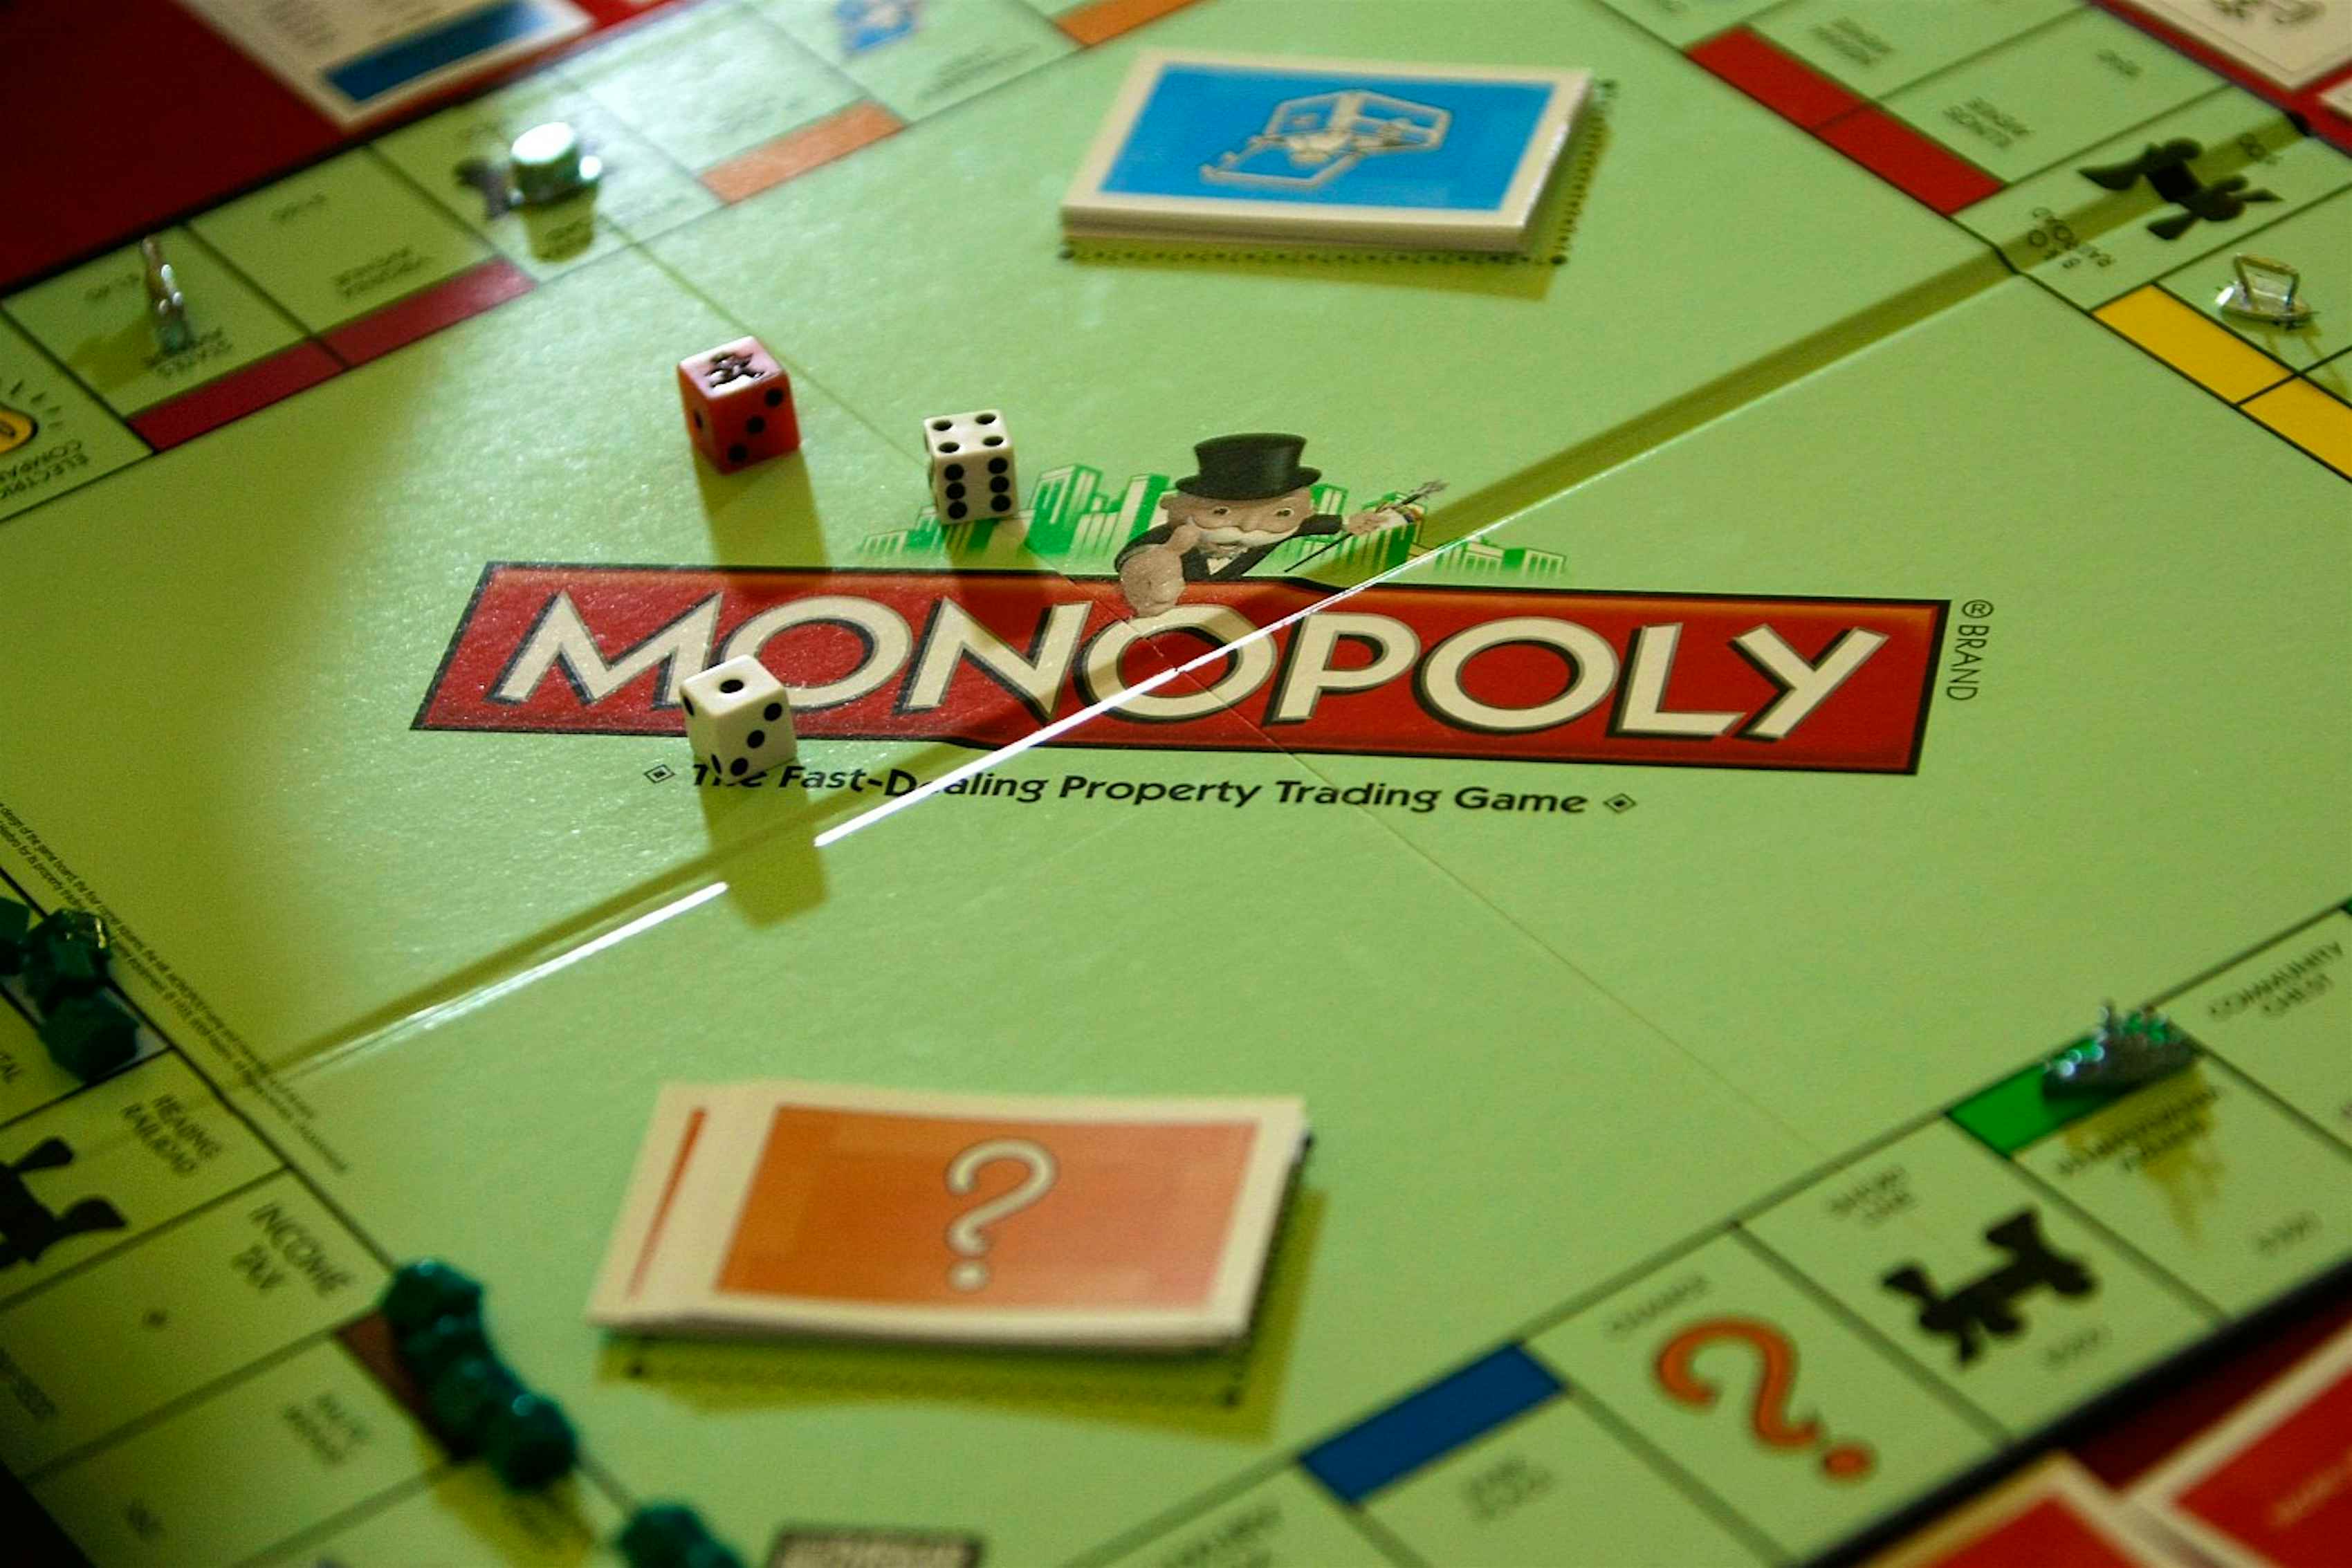 The world's first Monopoly hotel will open in Kuala Lumpur in 2019